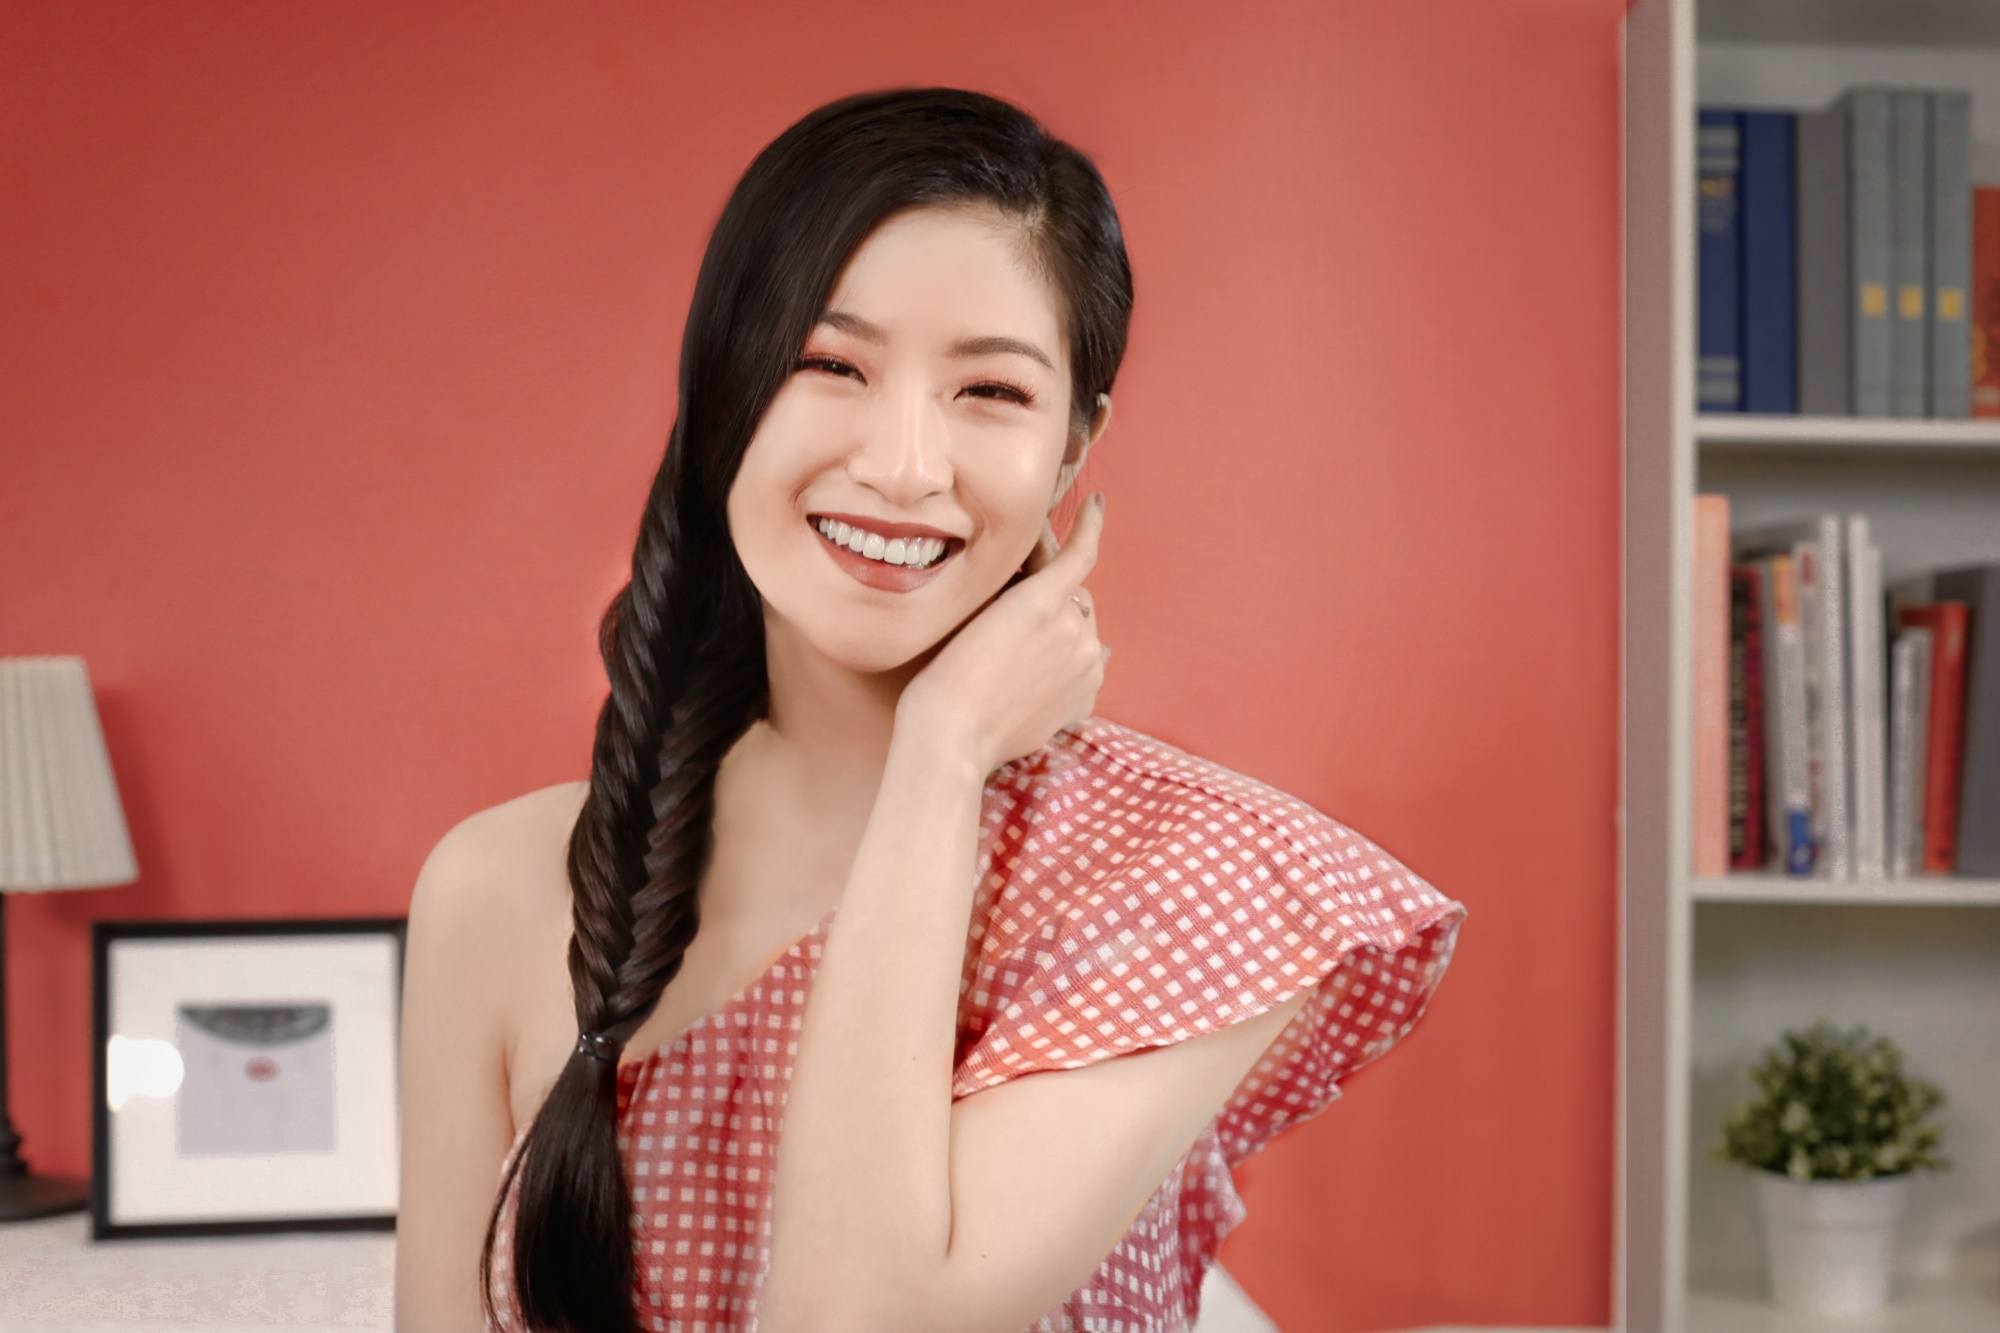 Asian woman with long hair in a side fishtail braid wearing a red top